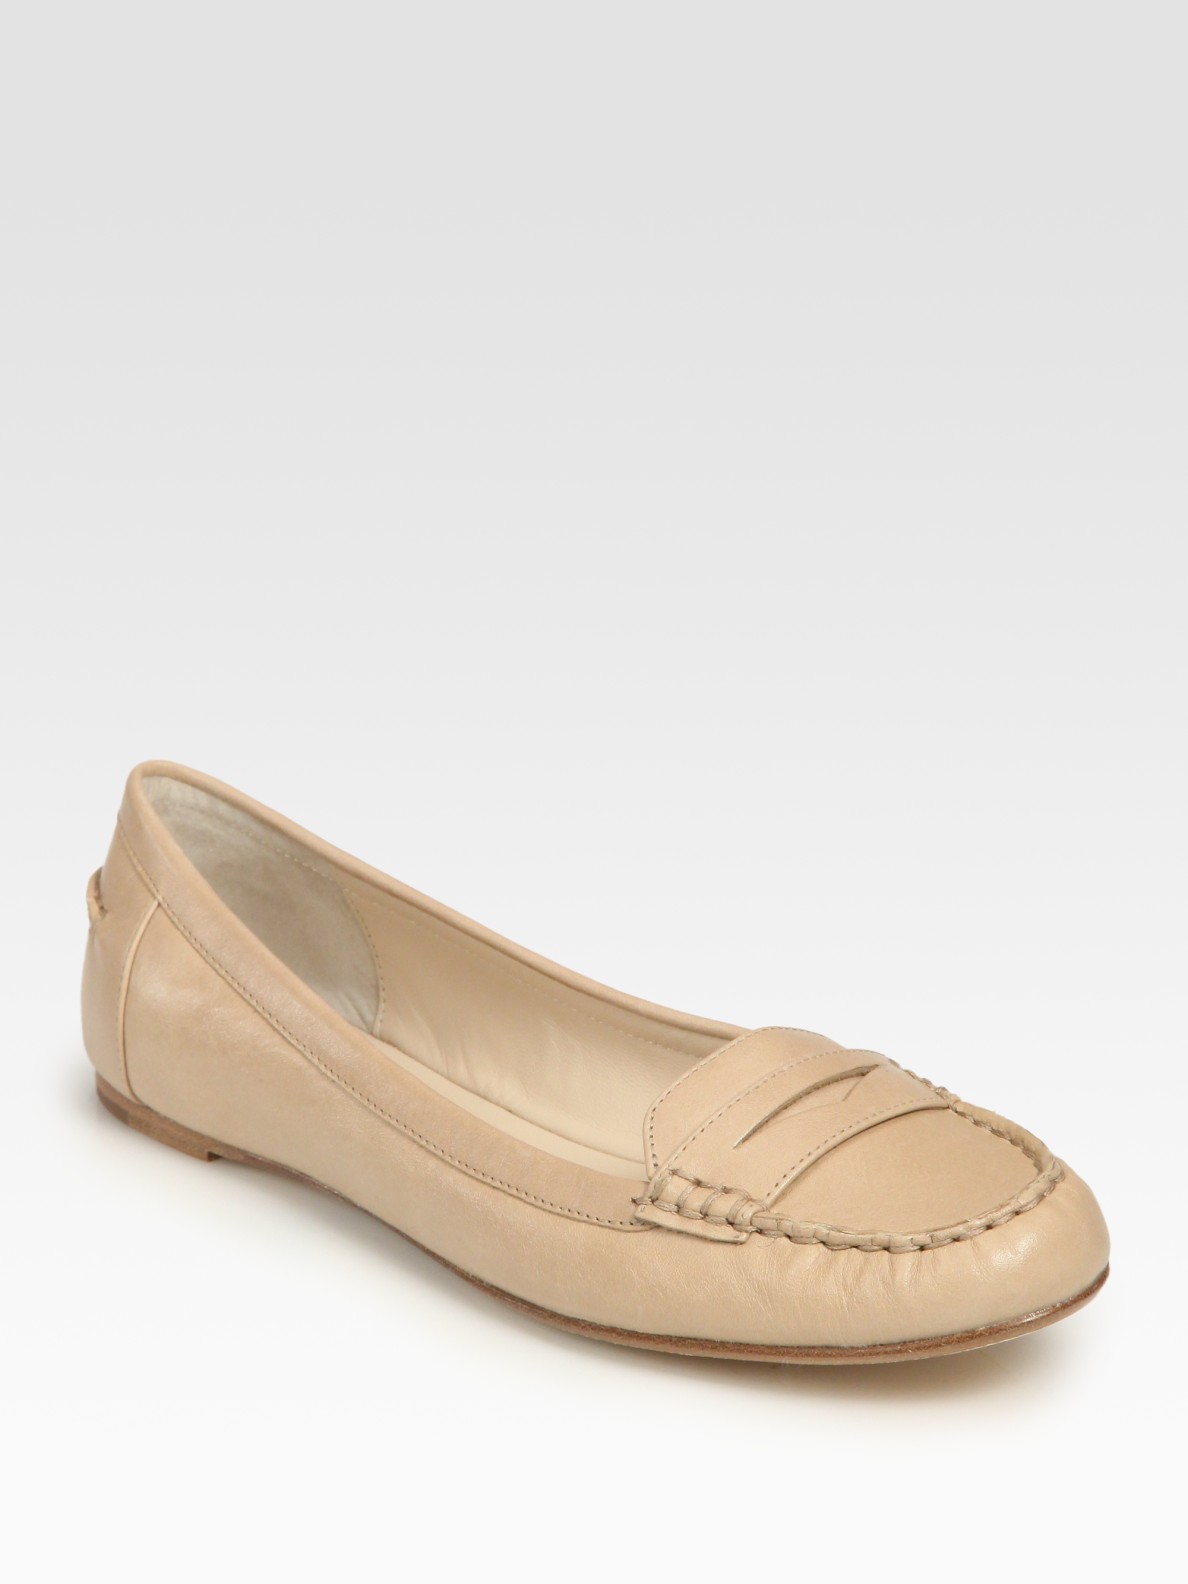 michael kors penny loafers